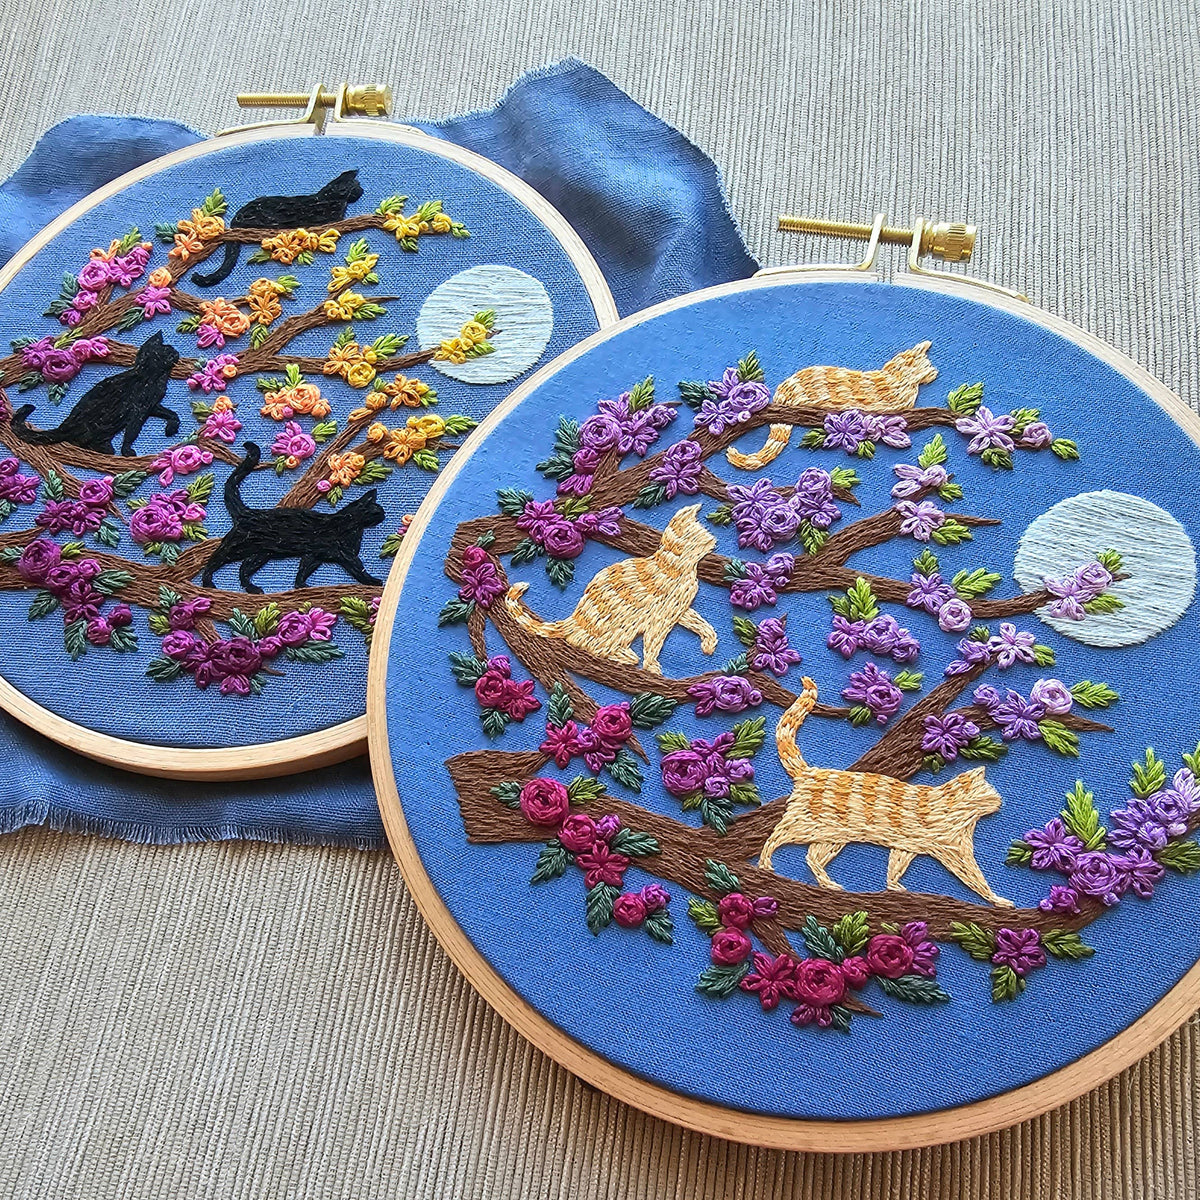 Cats &amp; Full Moon Embroidery Kit: Black Cats